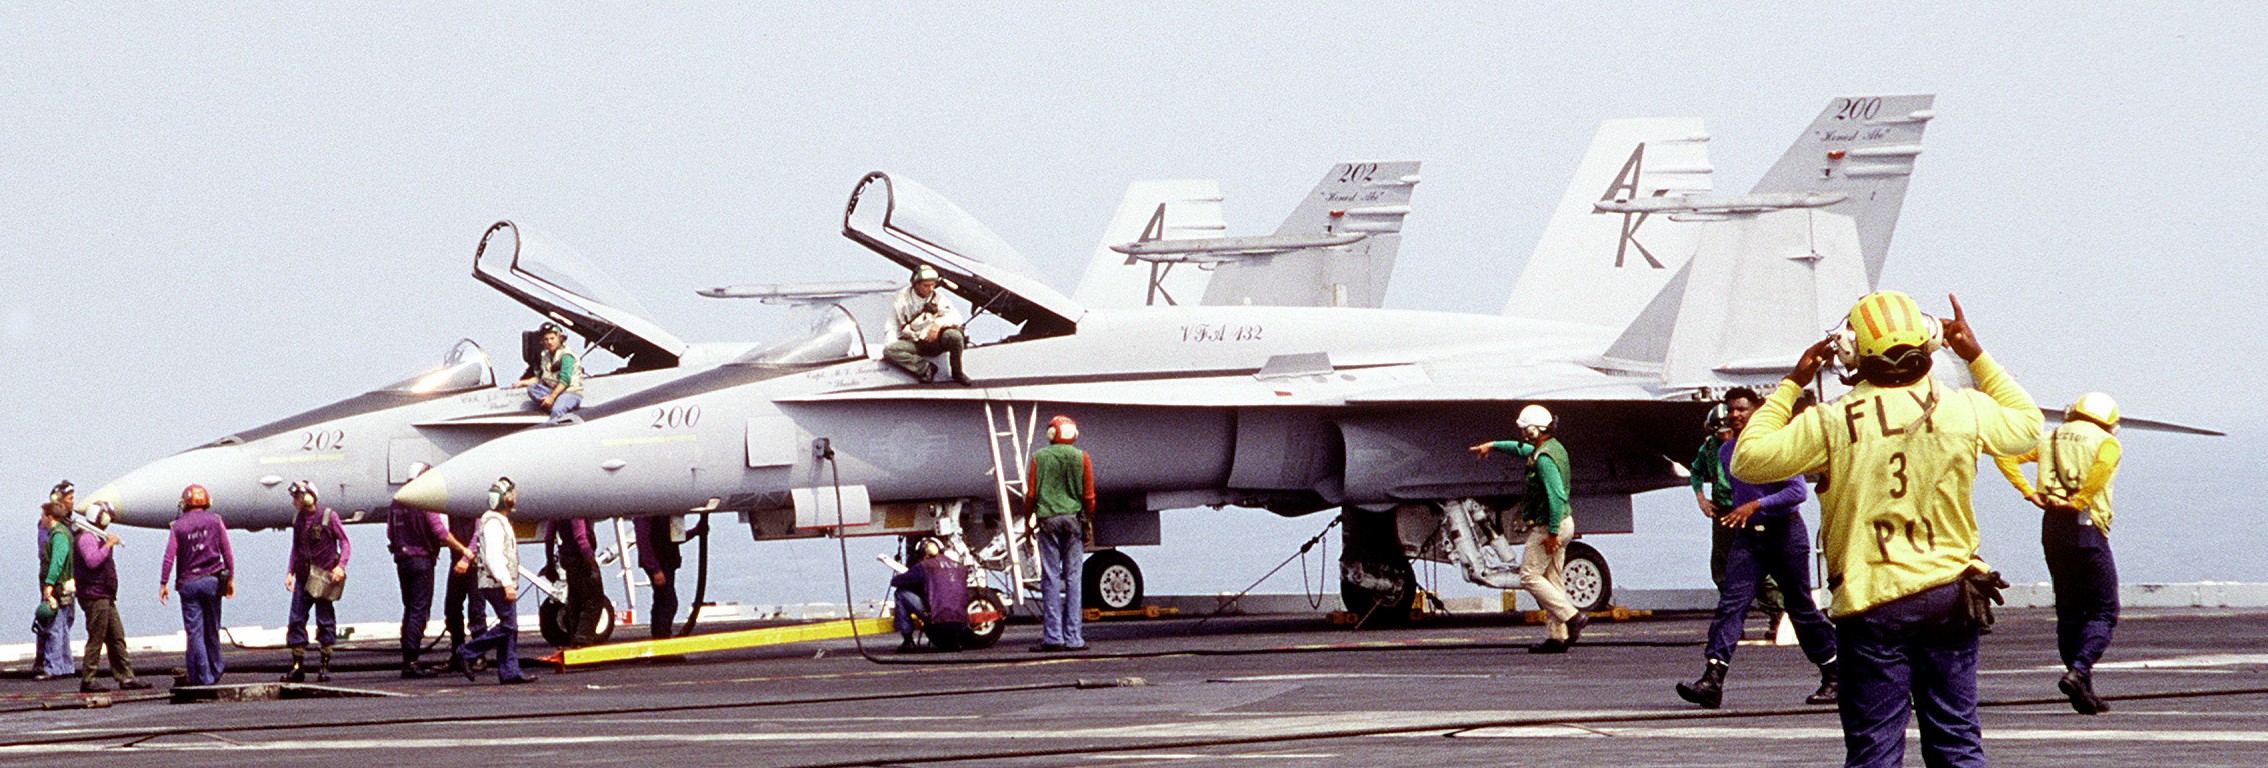 vfa-132 privateers strike fighter squadron f/a-18a hornet cvw-13 uss abraham lincoln cvn-72 1990 25